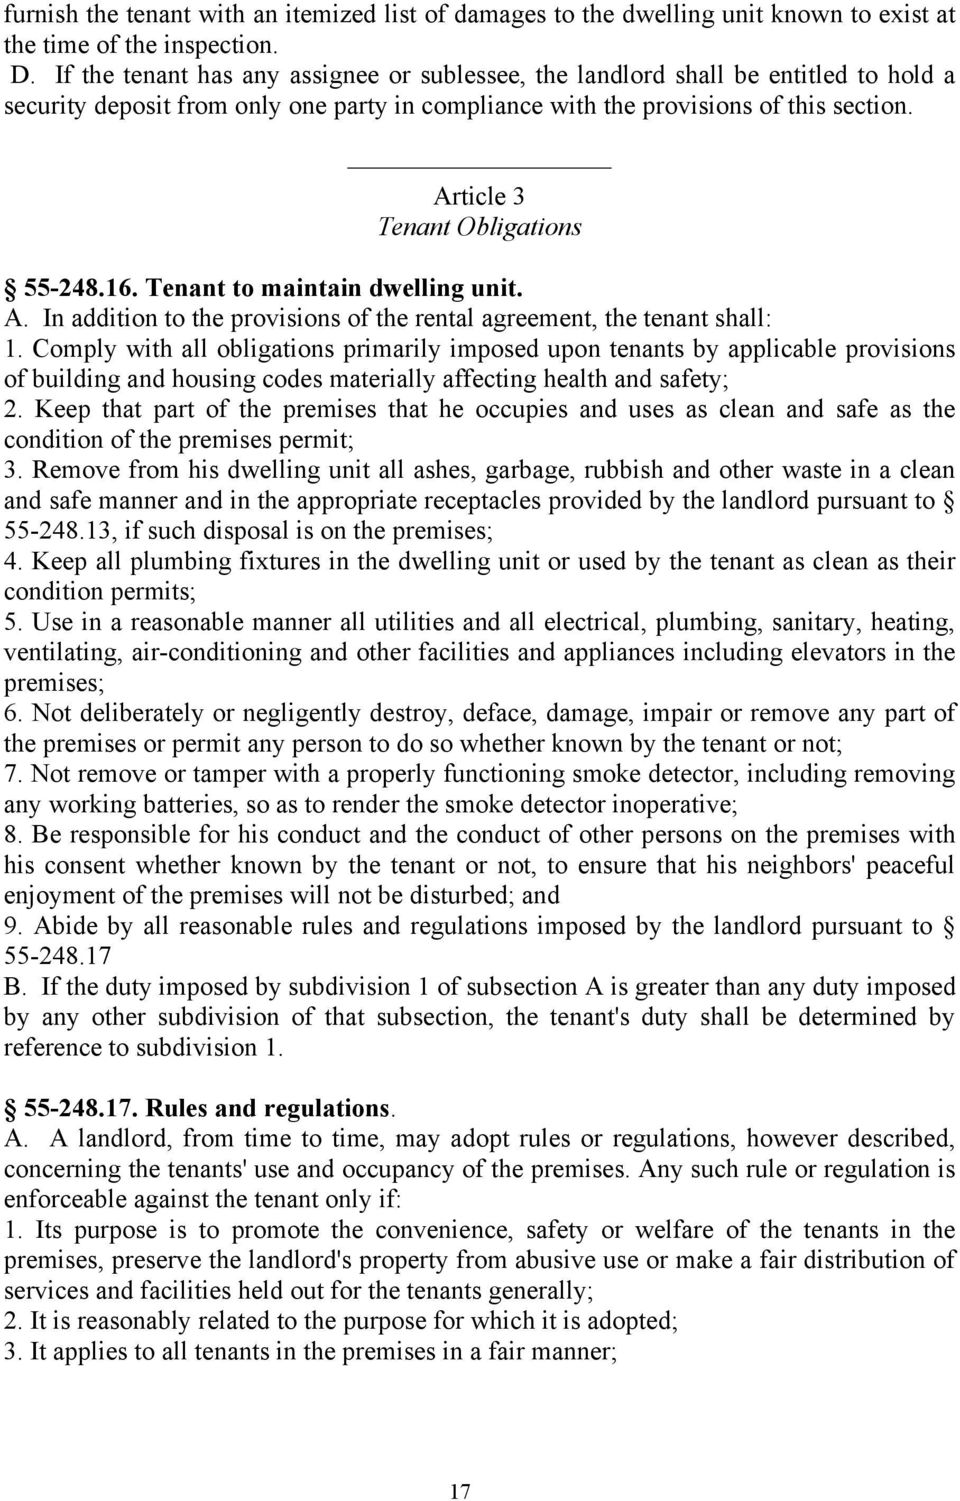 Article 3 Tenant Obligations 55-248.16. Tenant to maintain dwelling unit. A. In addition to the provisions of the rental agreement, the tenant shall: 1.